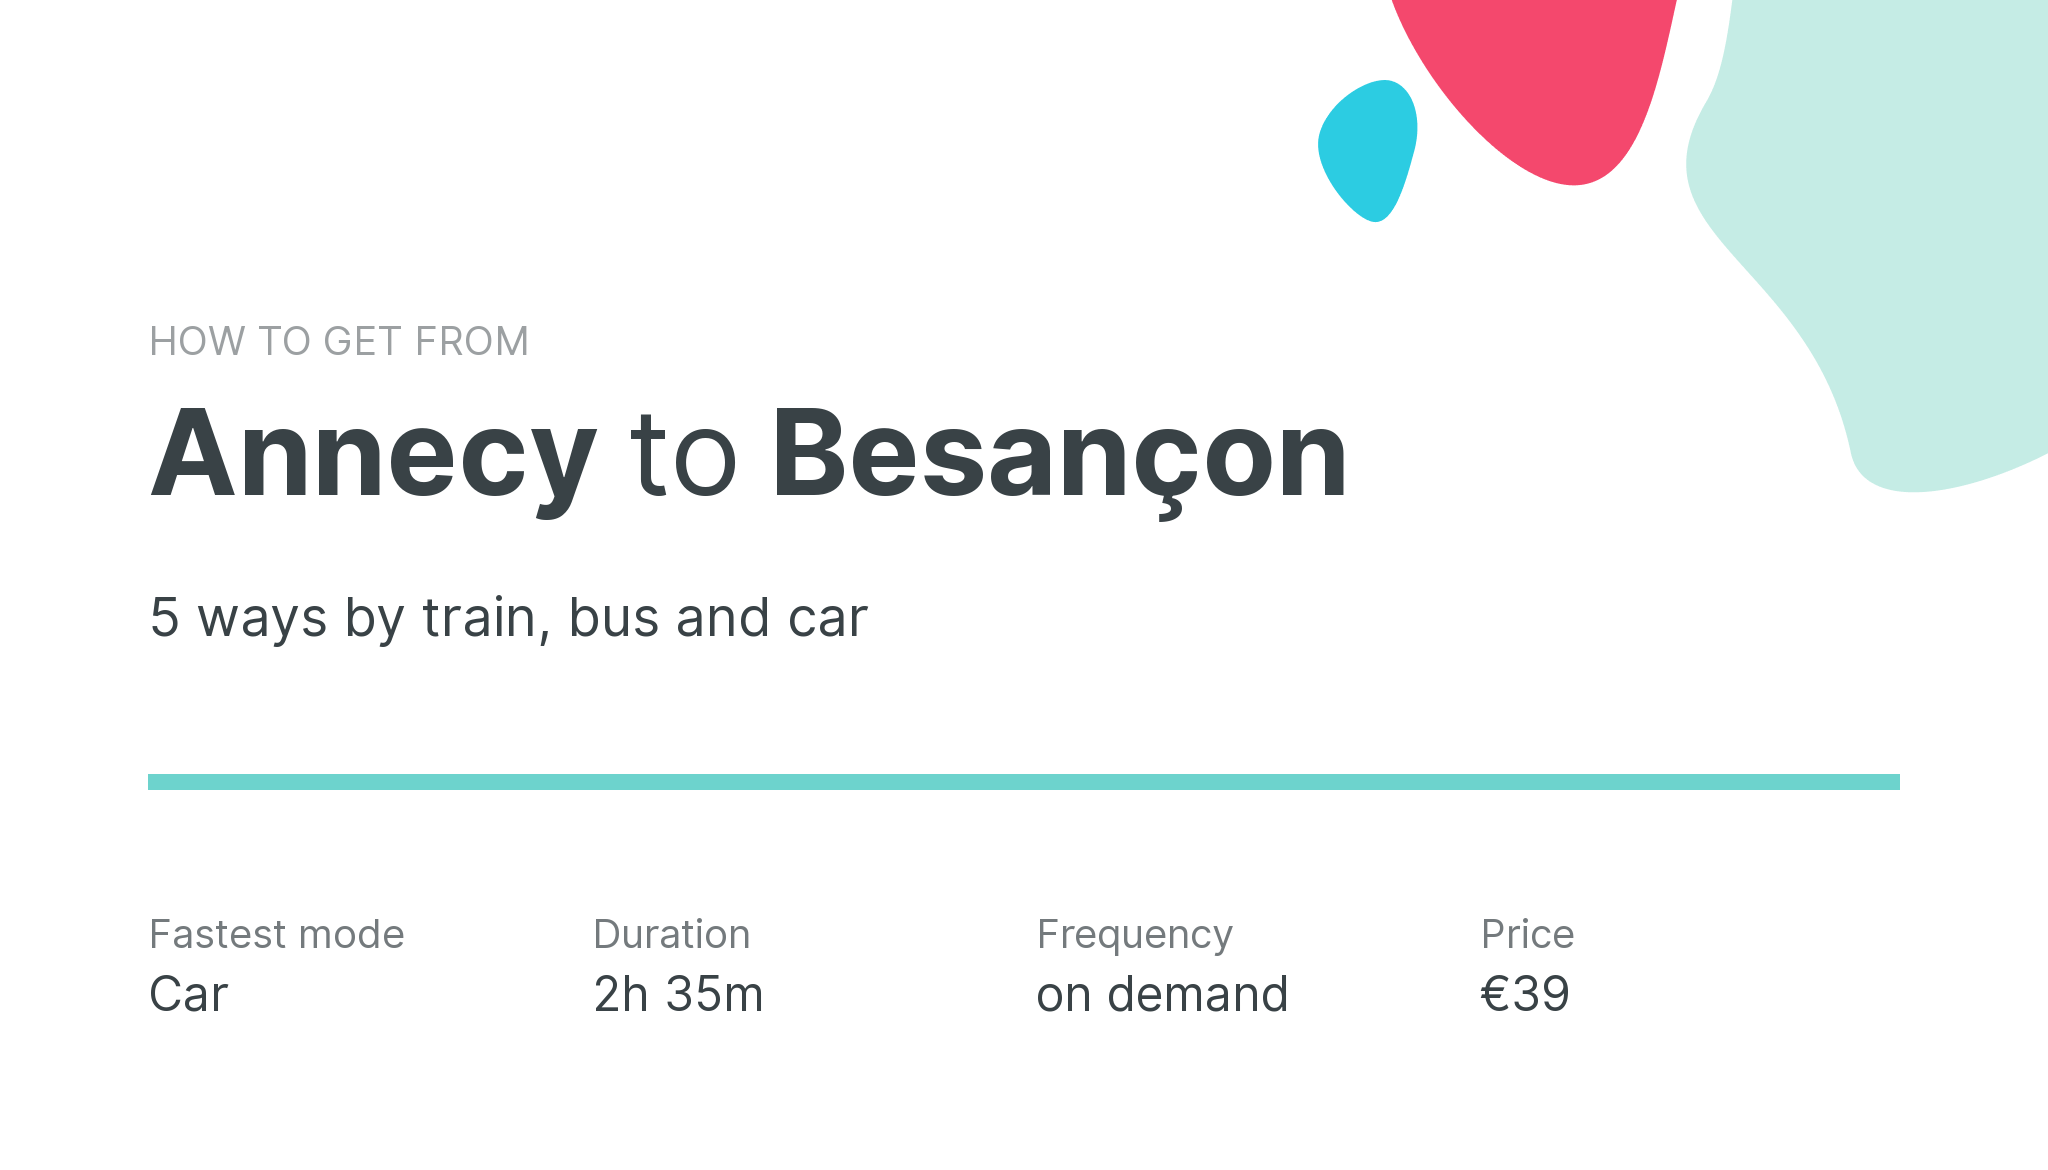 How do I get from Annecy to Besançon